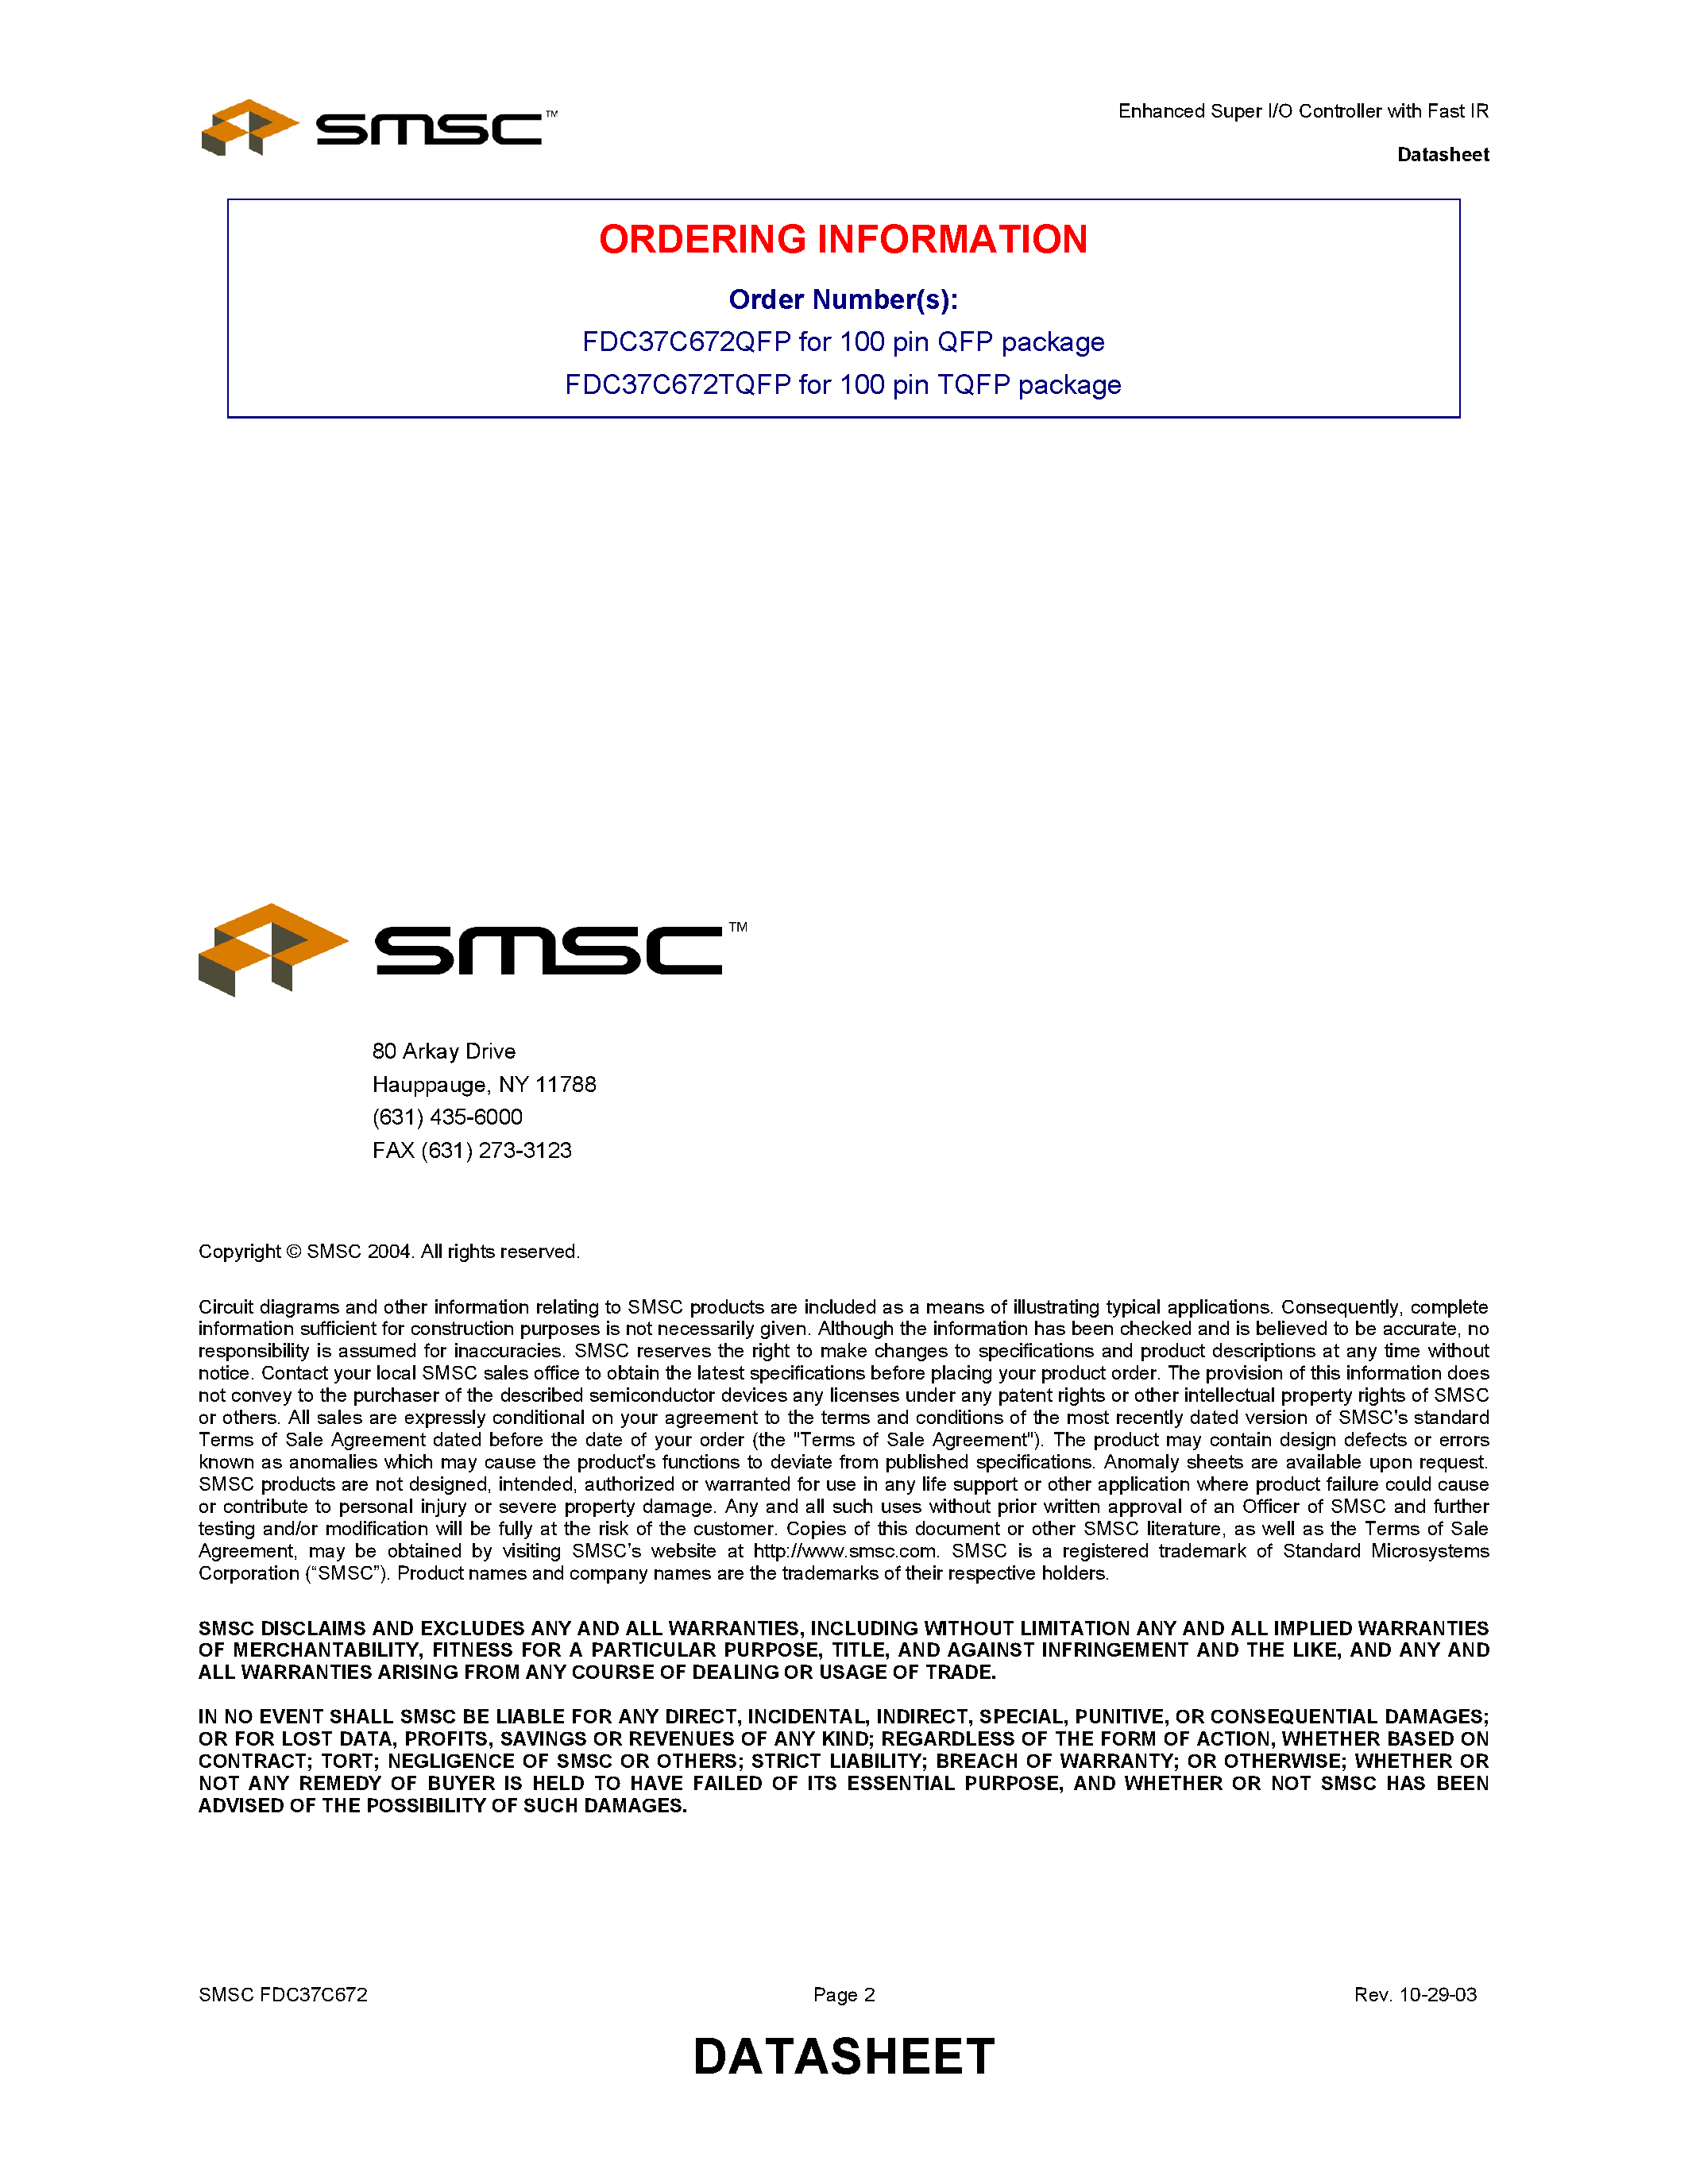 Datasheet FDC37C672QFP - ENHANCED SUPER I/O CONTROLLER WITH FAST IR page 2